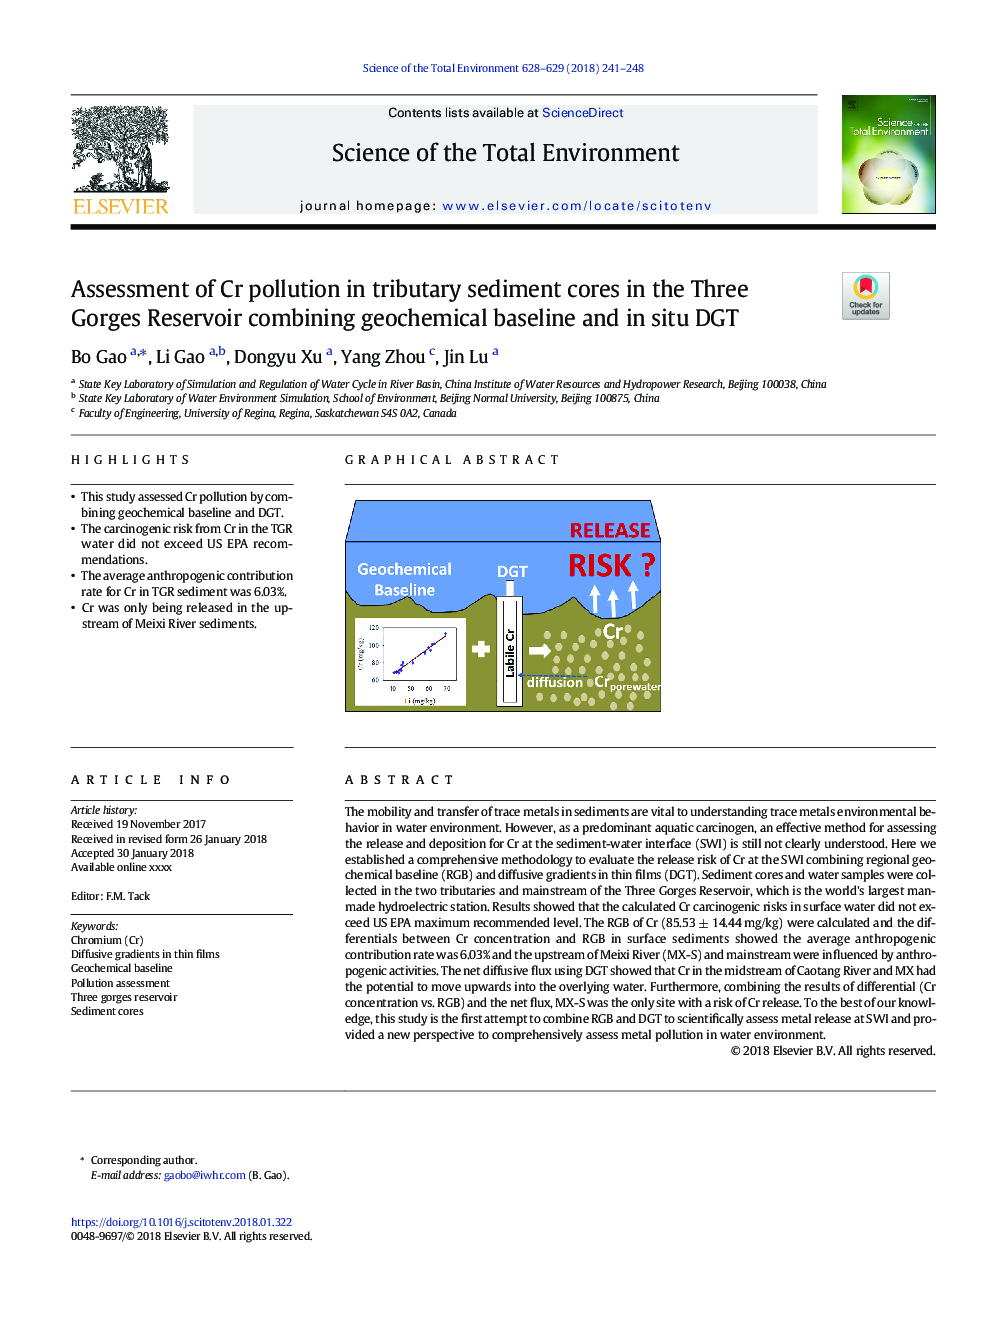 Assessment of Cr pollution in tributary sediment cores in the Three Gorges Reservoir combining geochemical baseline and in situ DGT